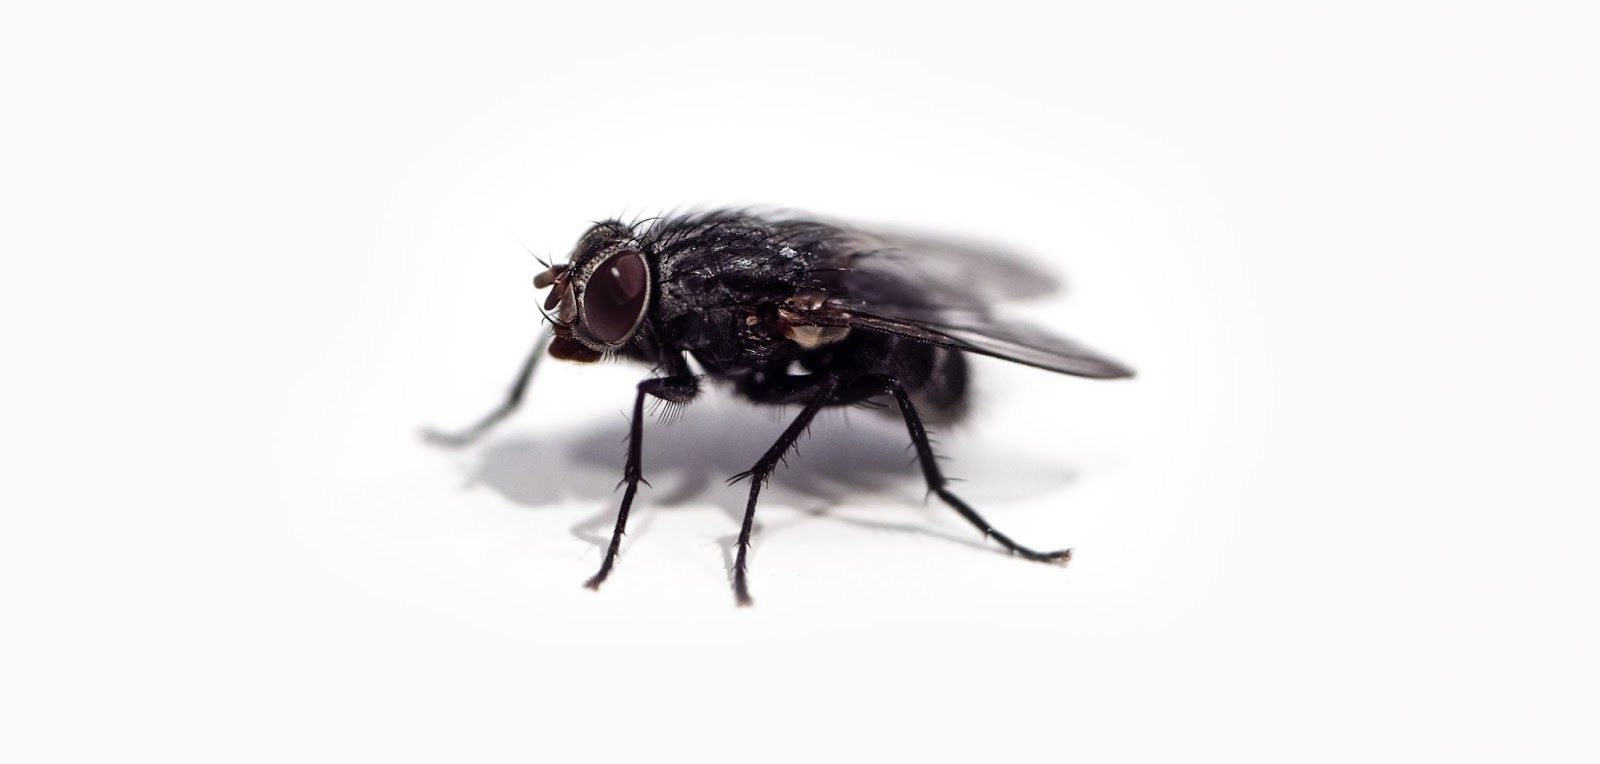 6 Gross Pest Facts We Bet You Didn’t Know